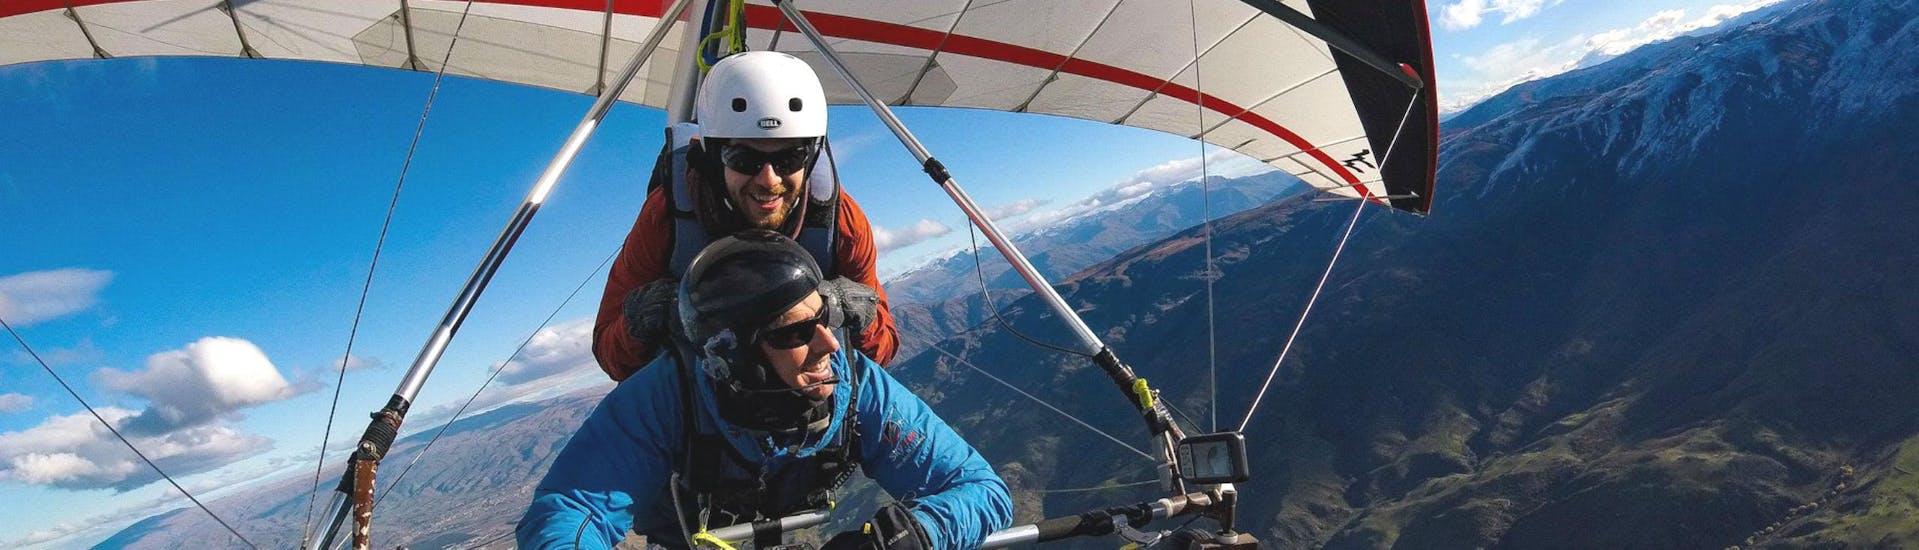 A hang gliding instructor from Skytrek Queenstown and his passenger are enjoying a scenic flight over the beautiful landscape close to Queenstown, New Zealand.